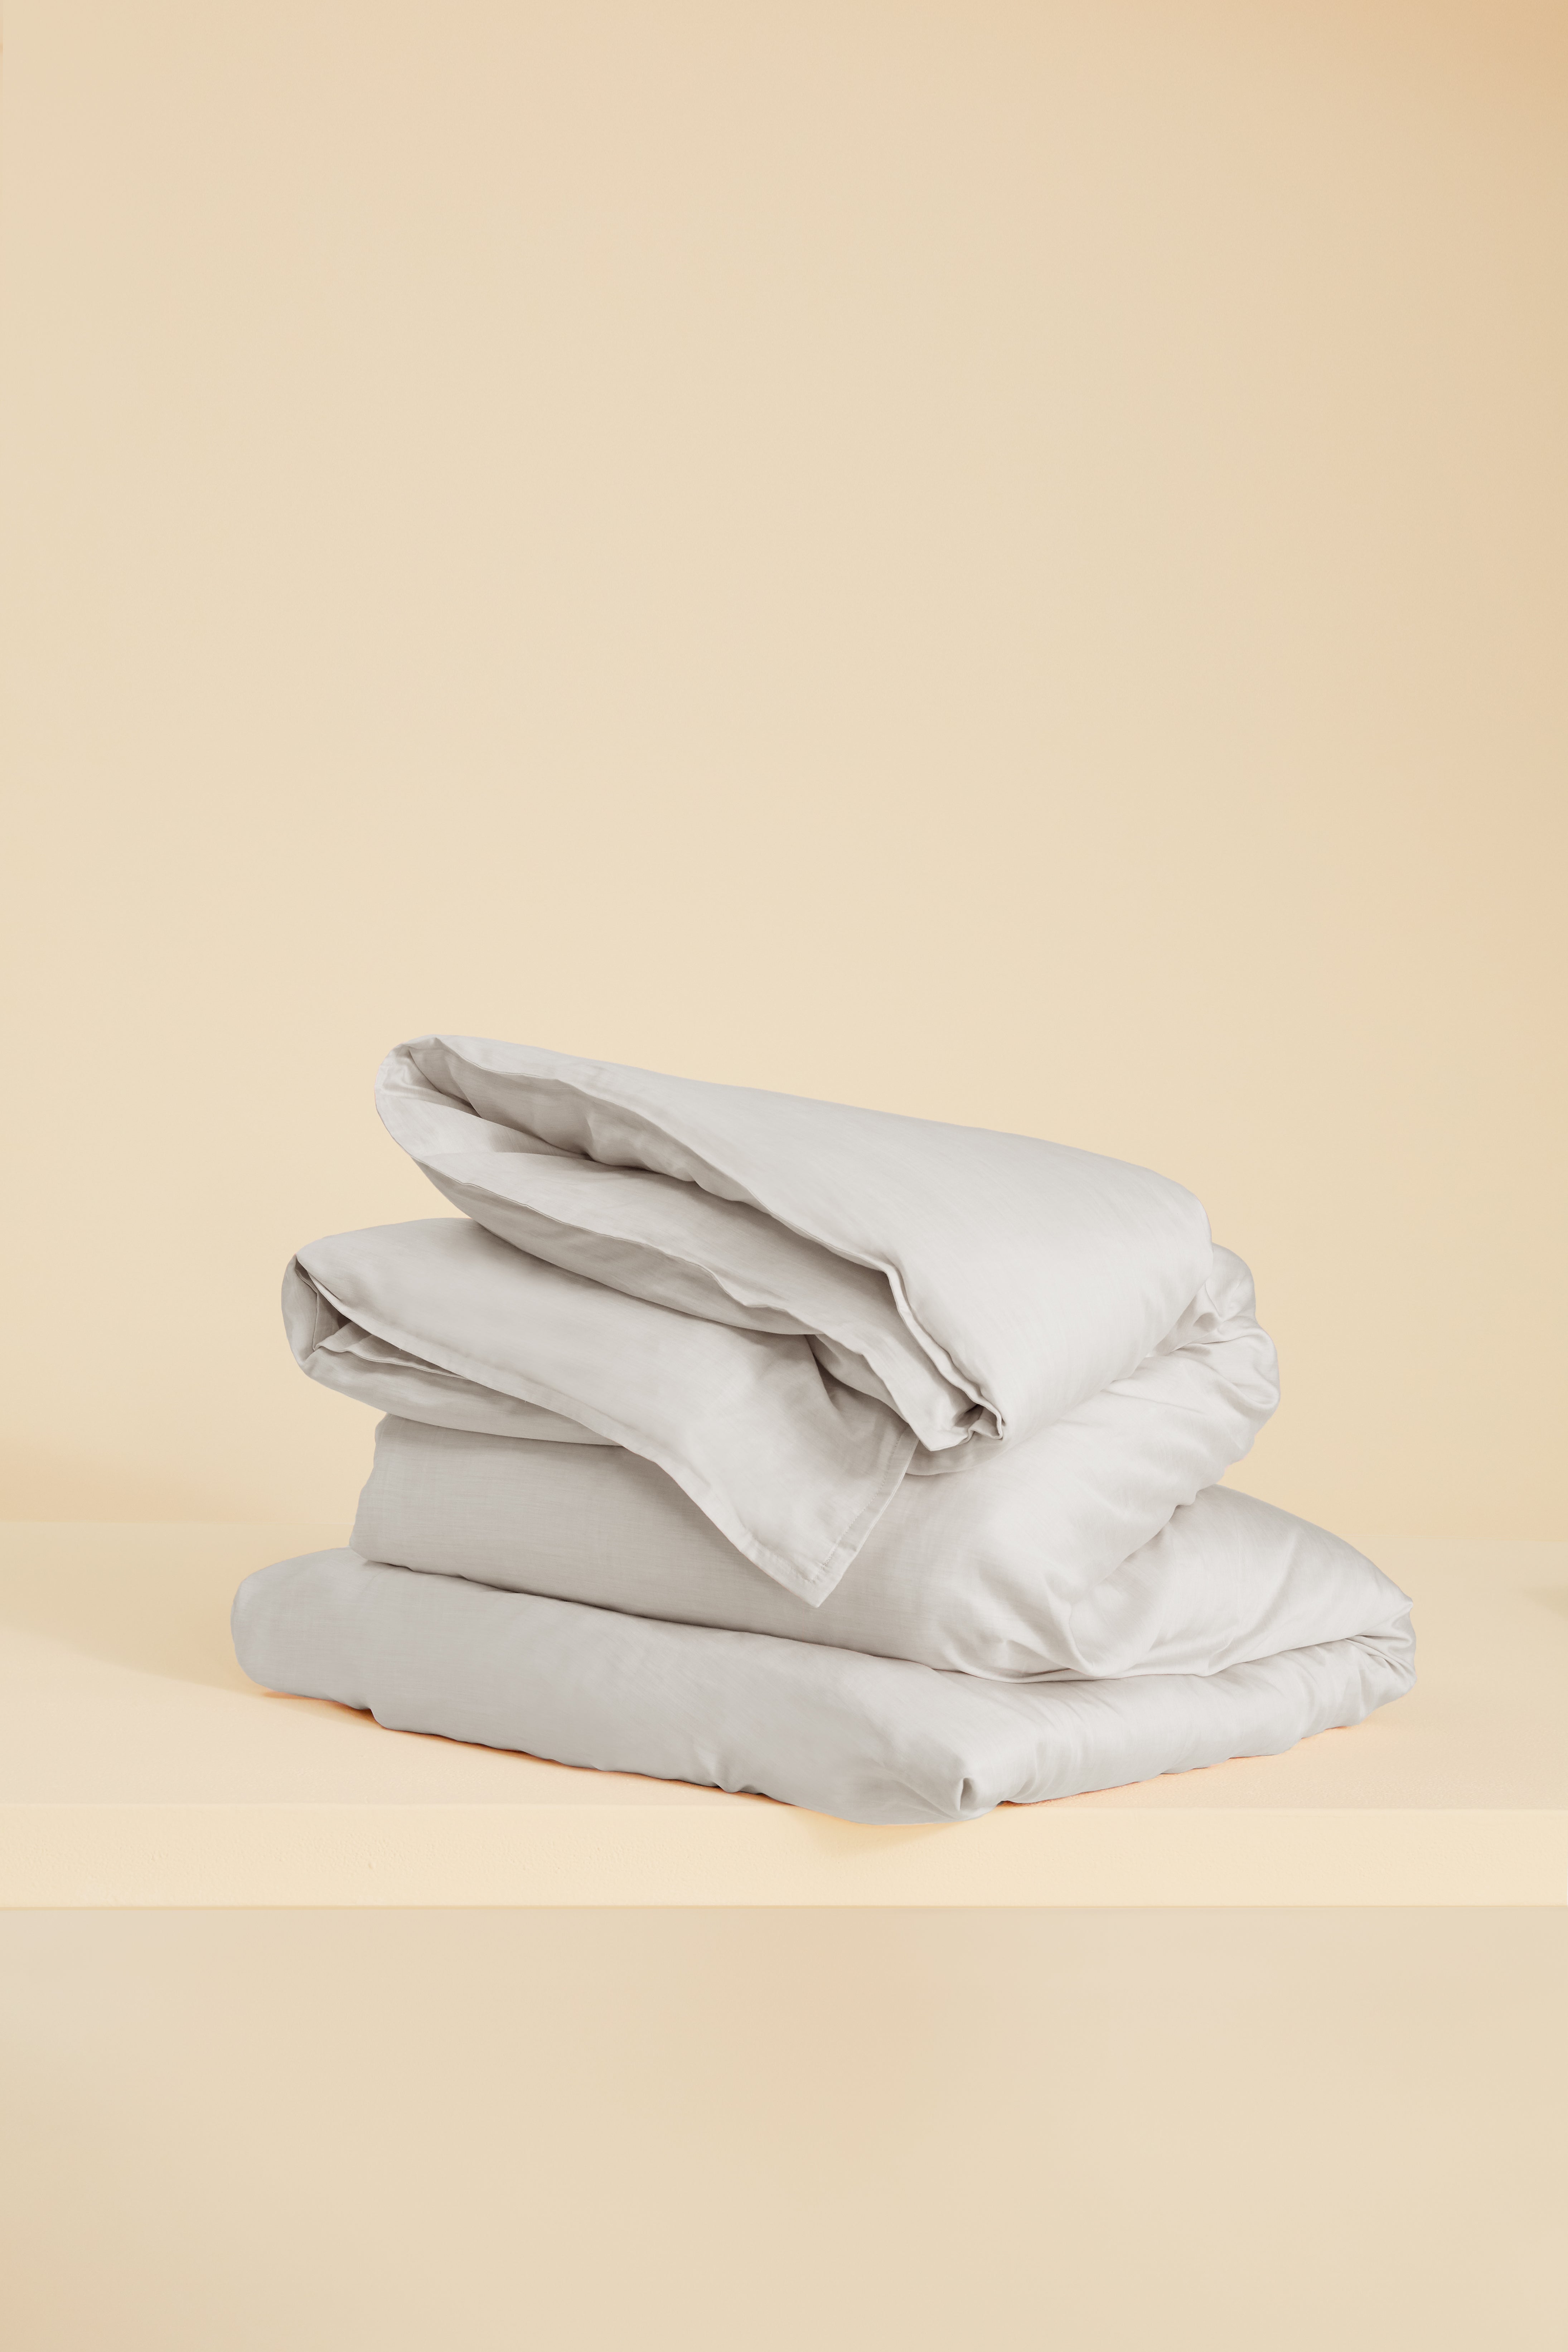 The Coolest New Sheets Are Made with Ultrasonic Tech and Natural Dyes